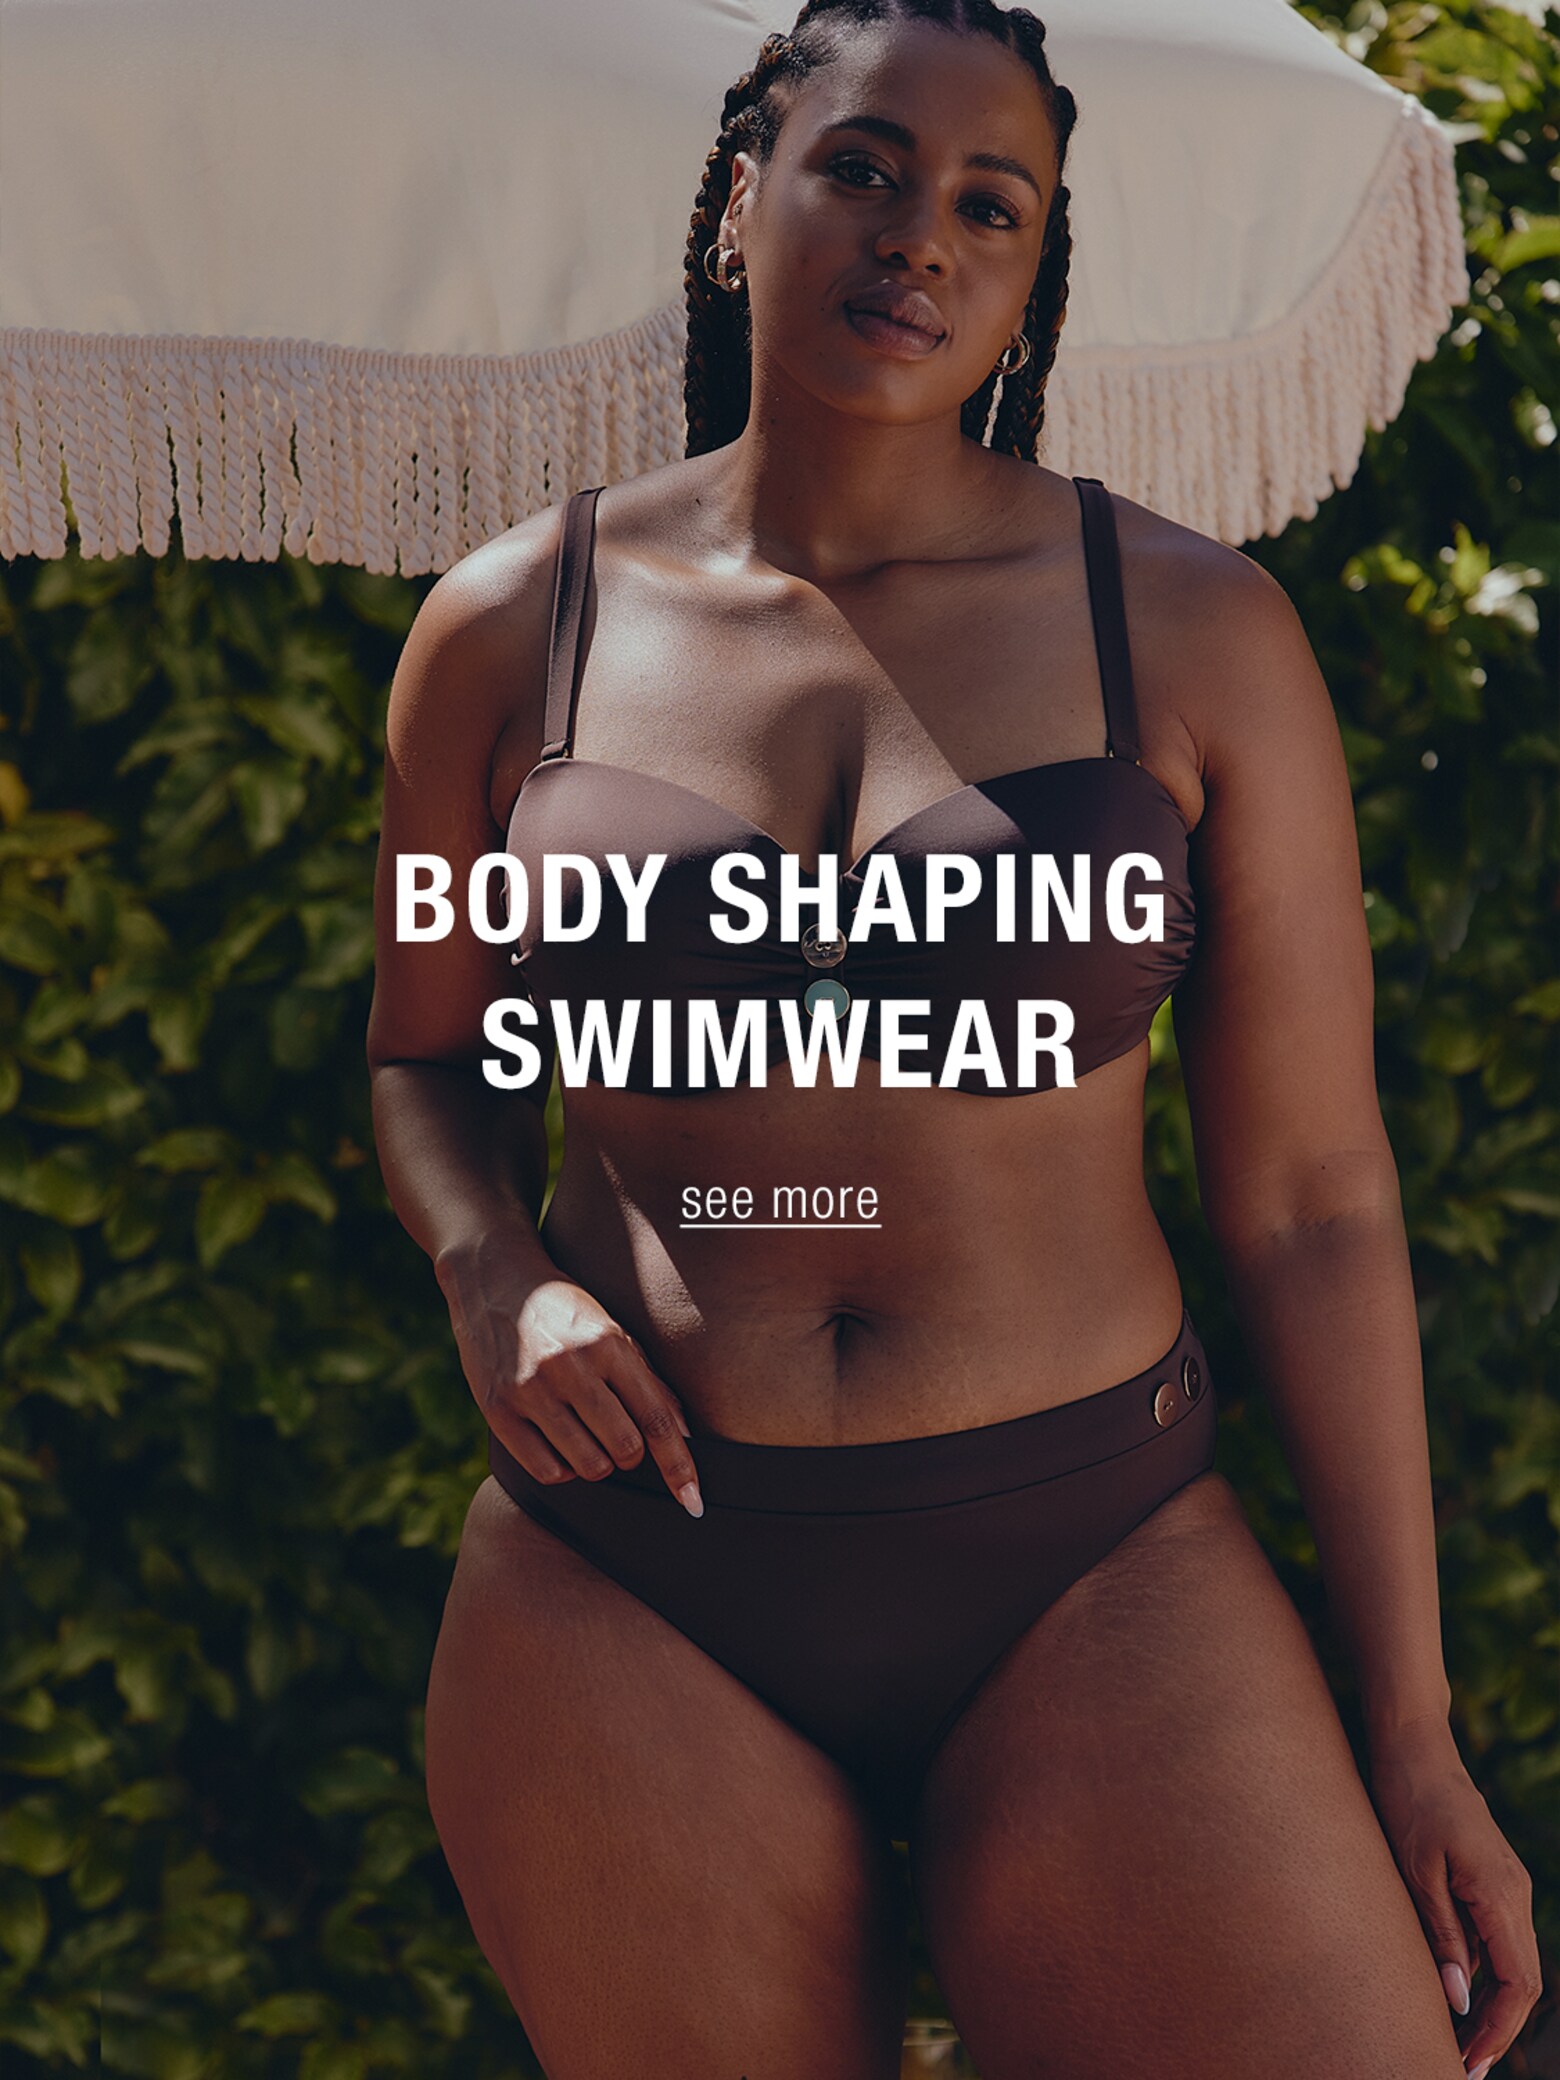 Find your best fit The swimwear edit